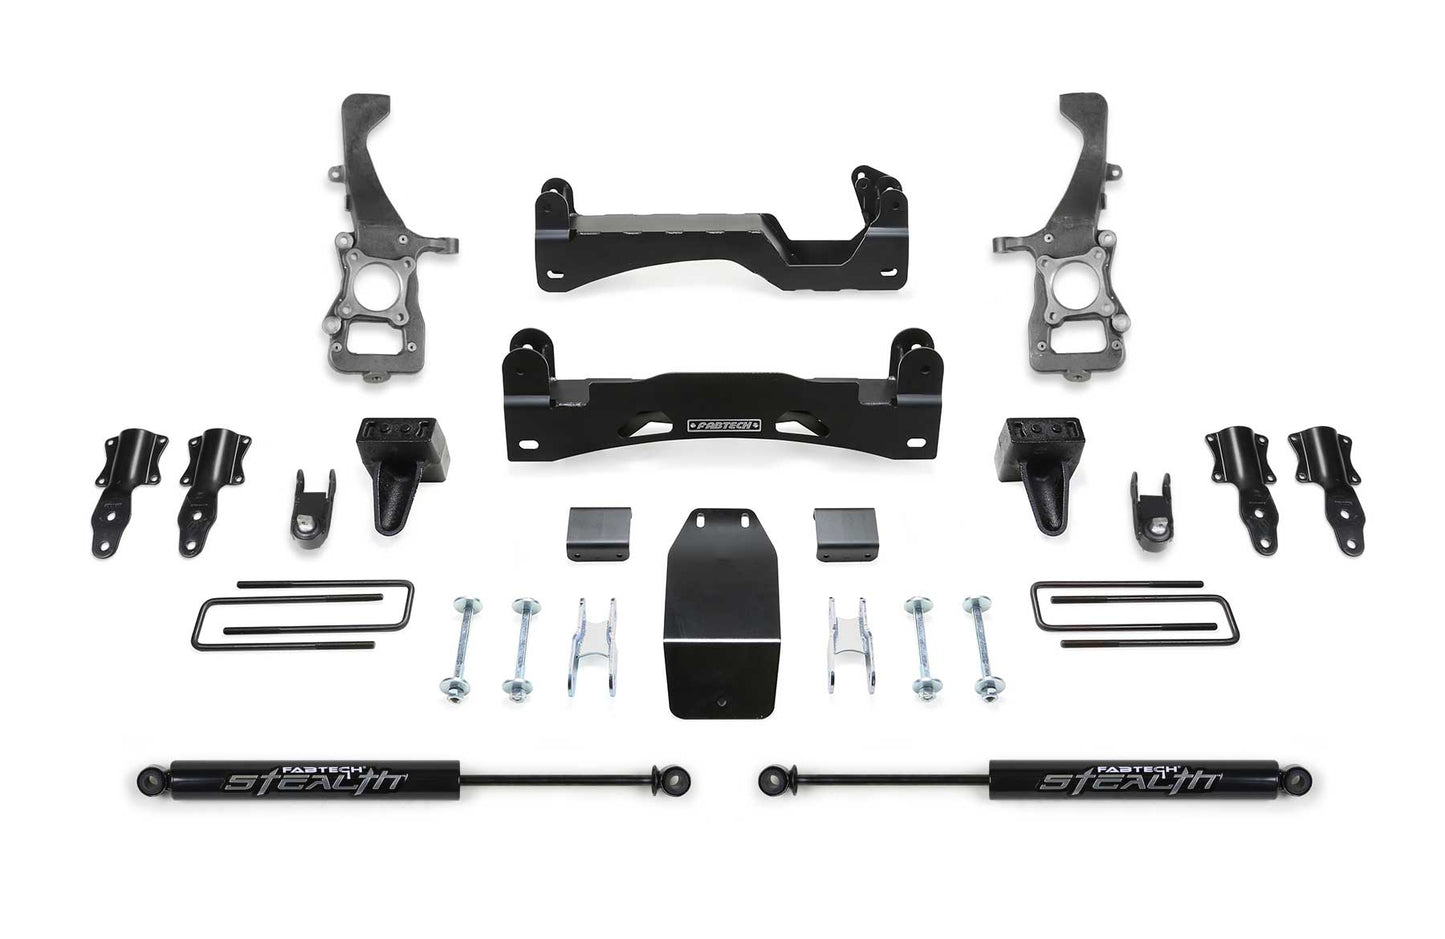 Fabtech 6 Inch Lift Kit with Front Shock Coilover Spacers & Rear Stealth Shocks Ford F150 2021 - Mid-Atlantic Off-Roading